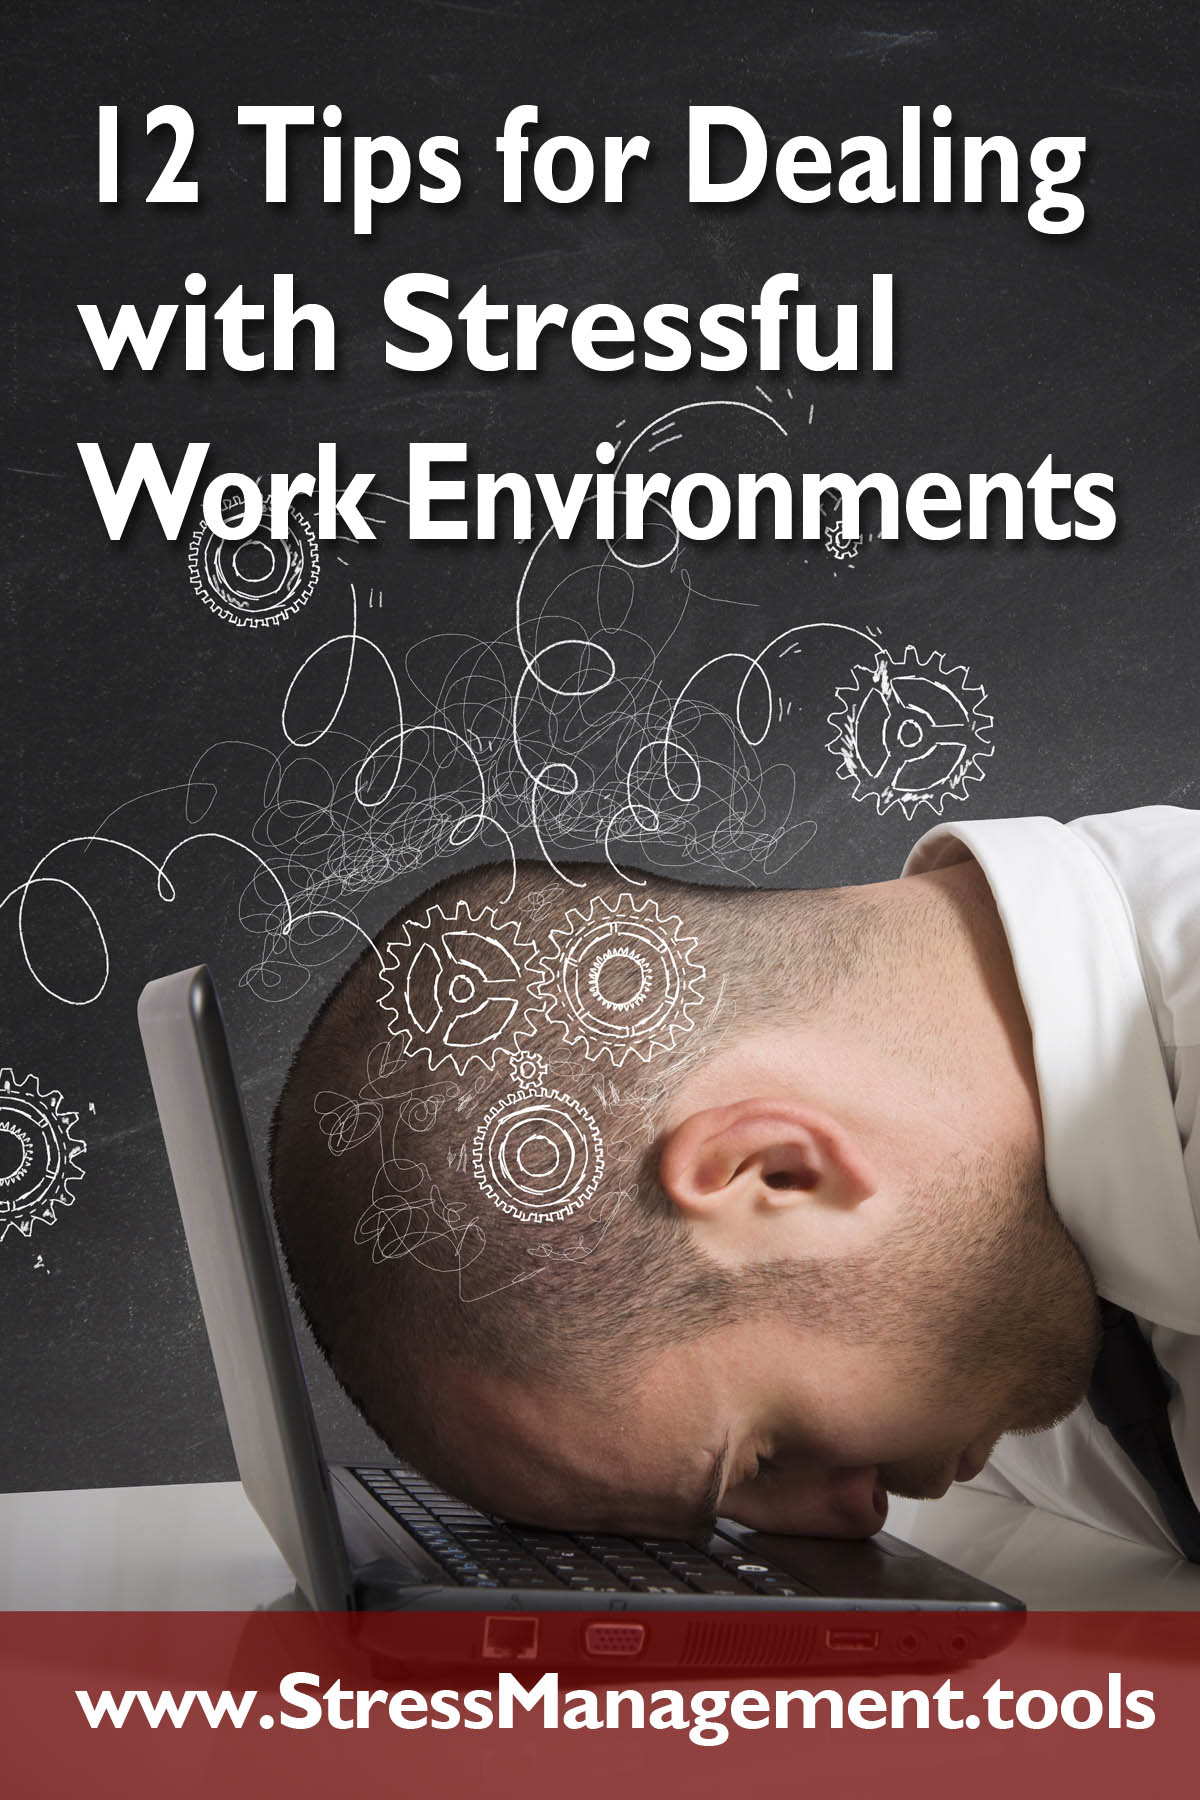 12 Tips for Dealing with Stressful Work Environments